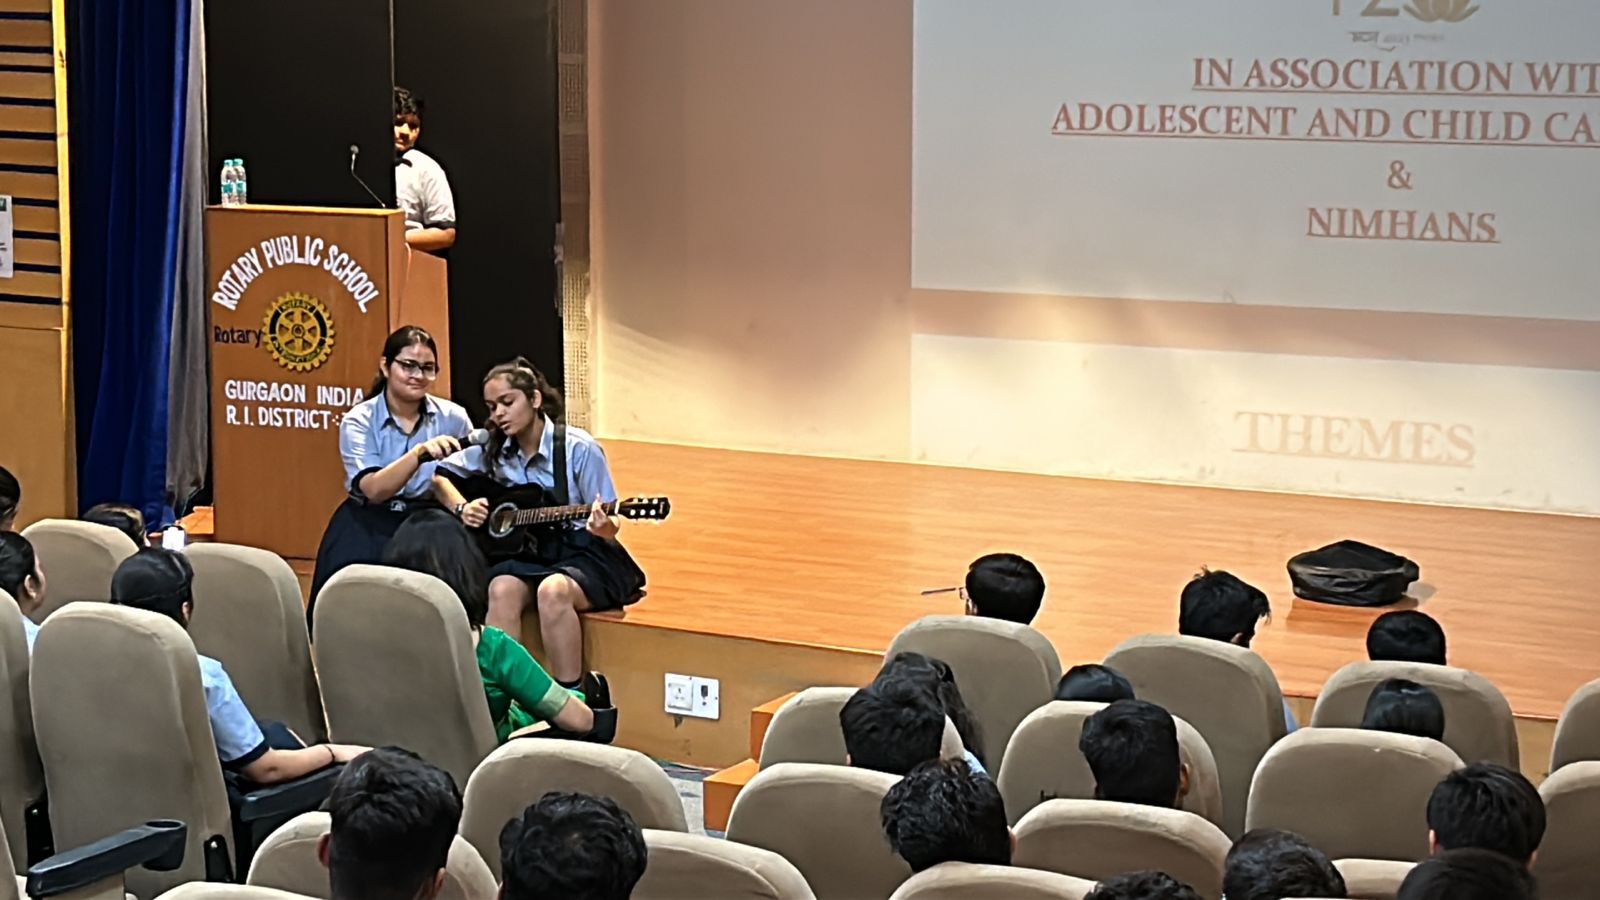 Glimpses of Workshop On Adolescent and Child Care in association with AACCI and NIMHANS